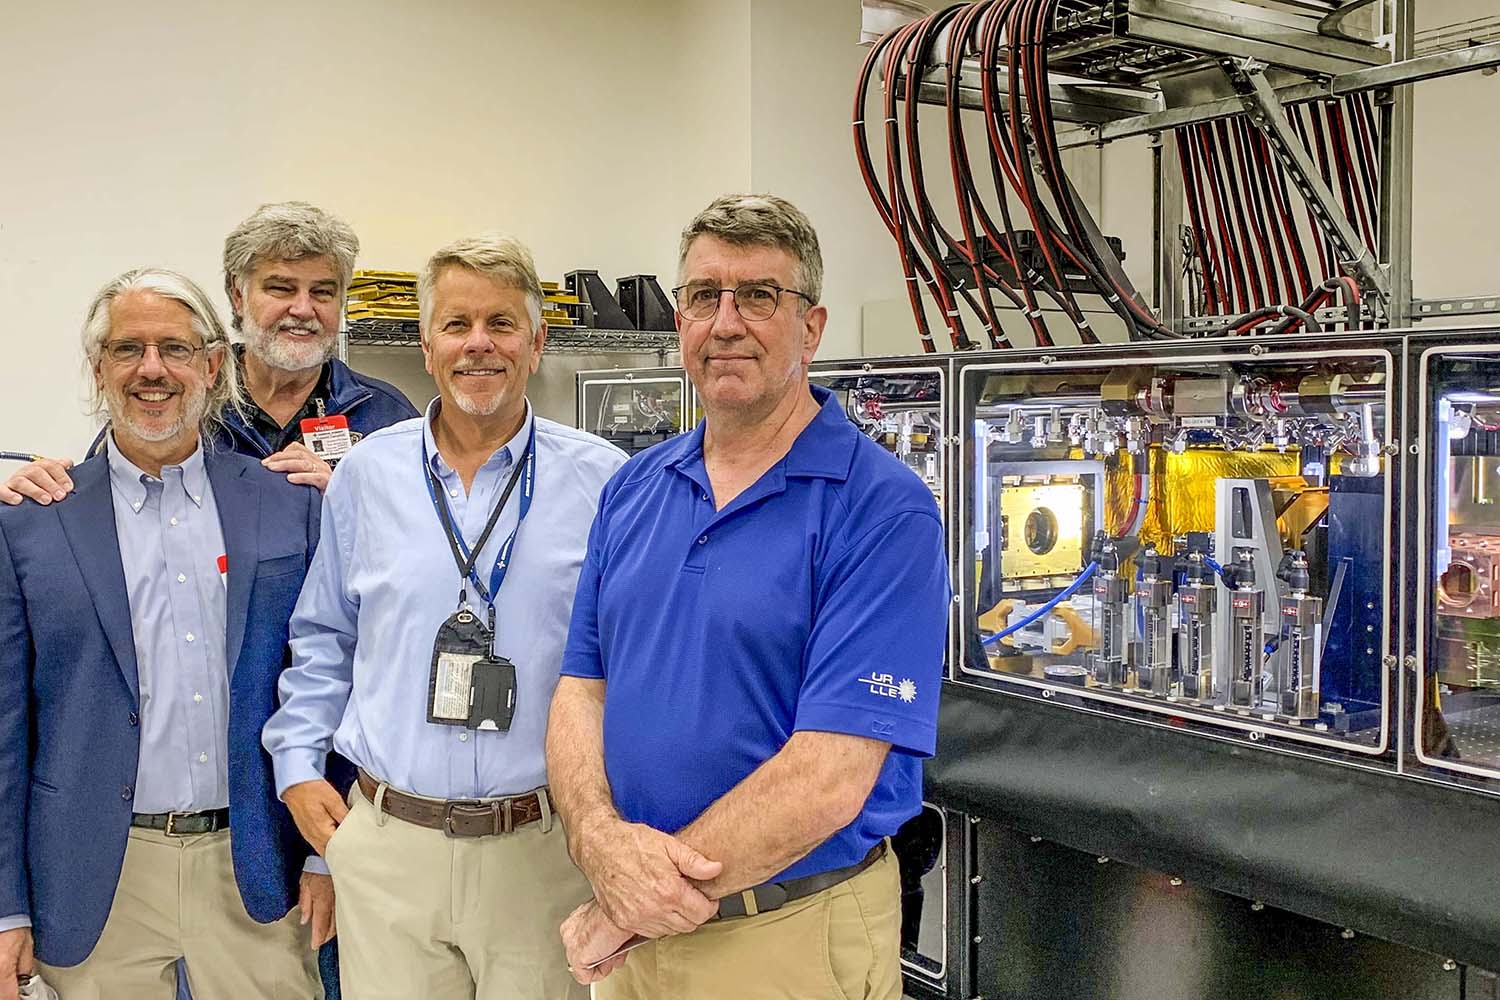 Roger Falcone, Mike Campbell, Mike Perry, and Jon Zuegel at General Atomics.